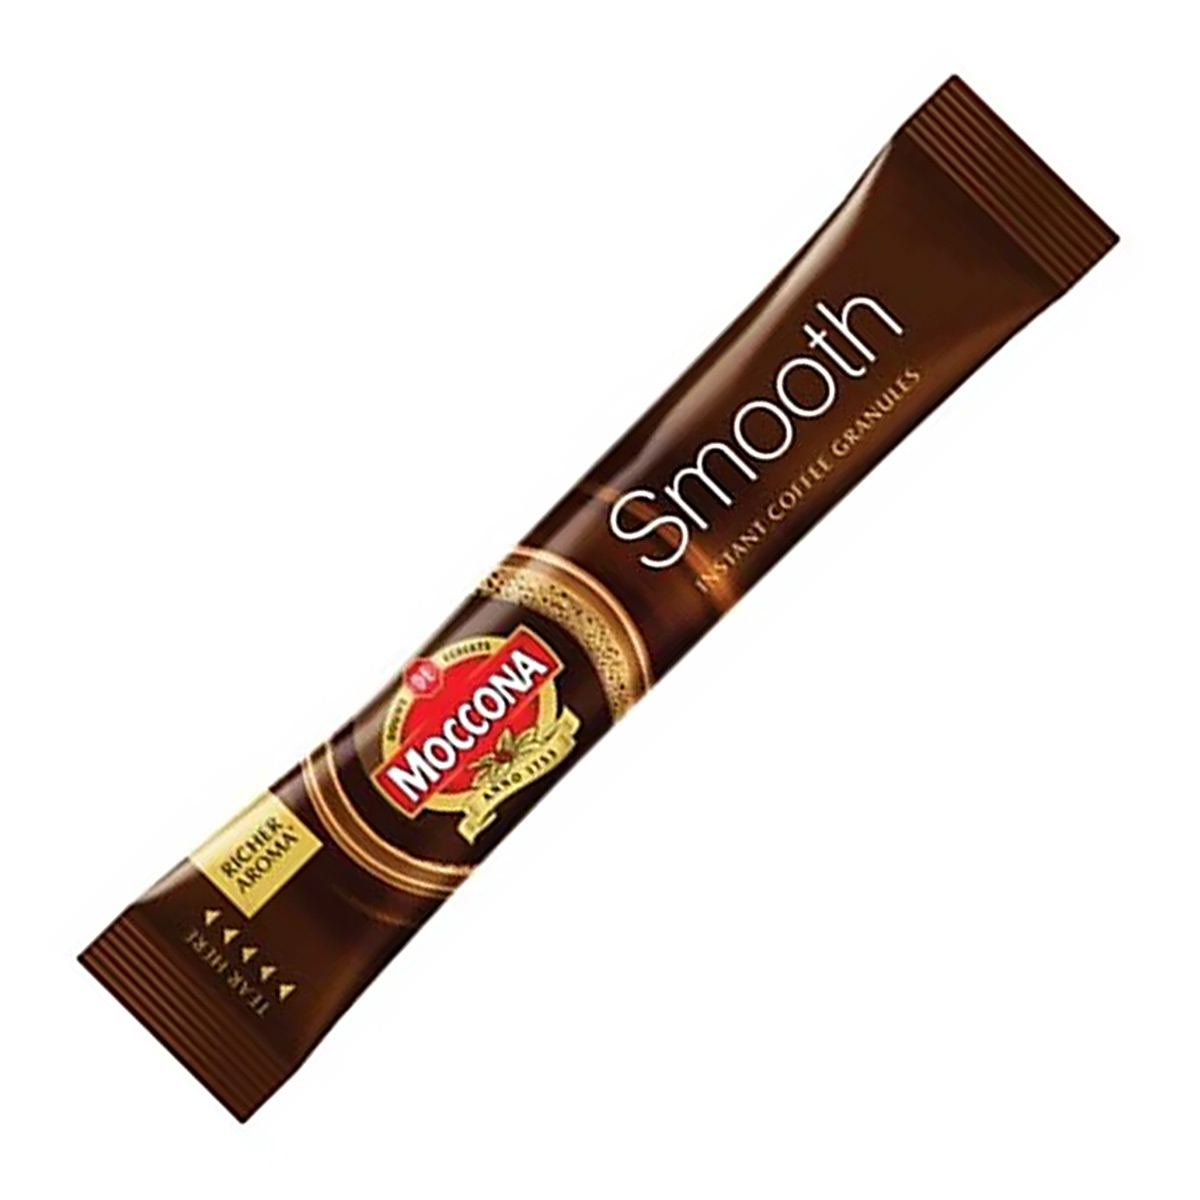 consumables-hospitality-beverage-food-moccona-smooth-coffee-sticks-1.7gm-x1000-smooth-granulated-instant-coffee-mild-well-rounded-coffee-everyday-drinking-vjs-distributors-hawkes-bay-nz-1671860